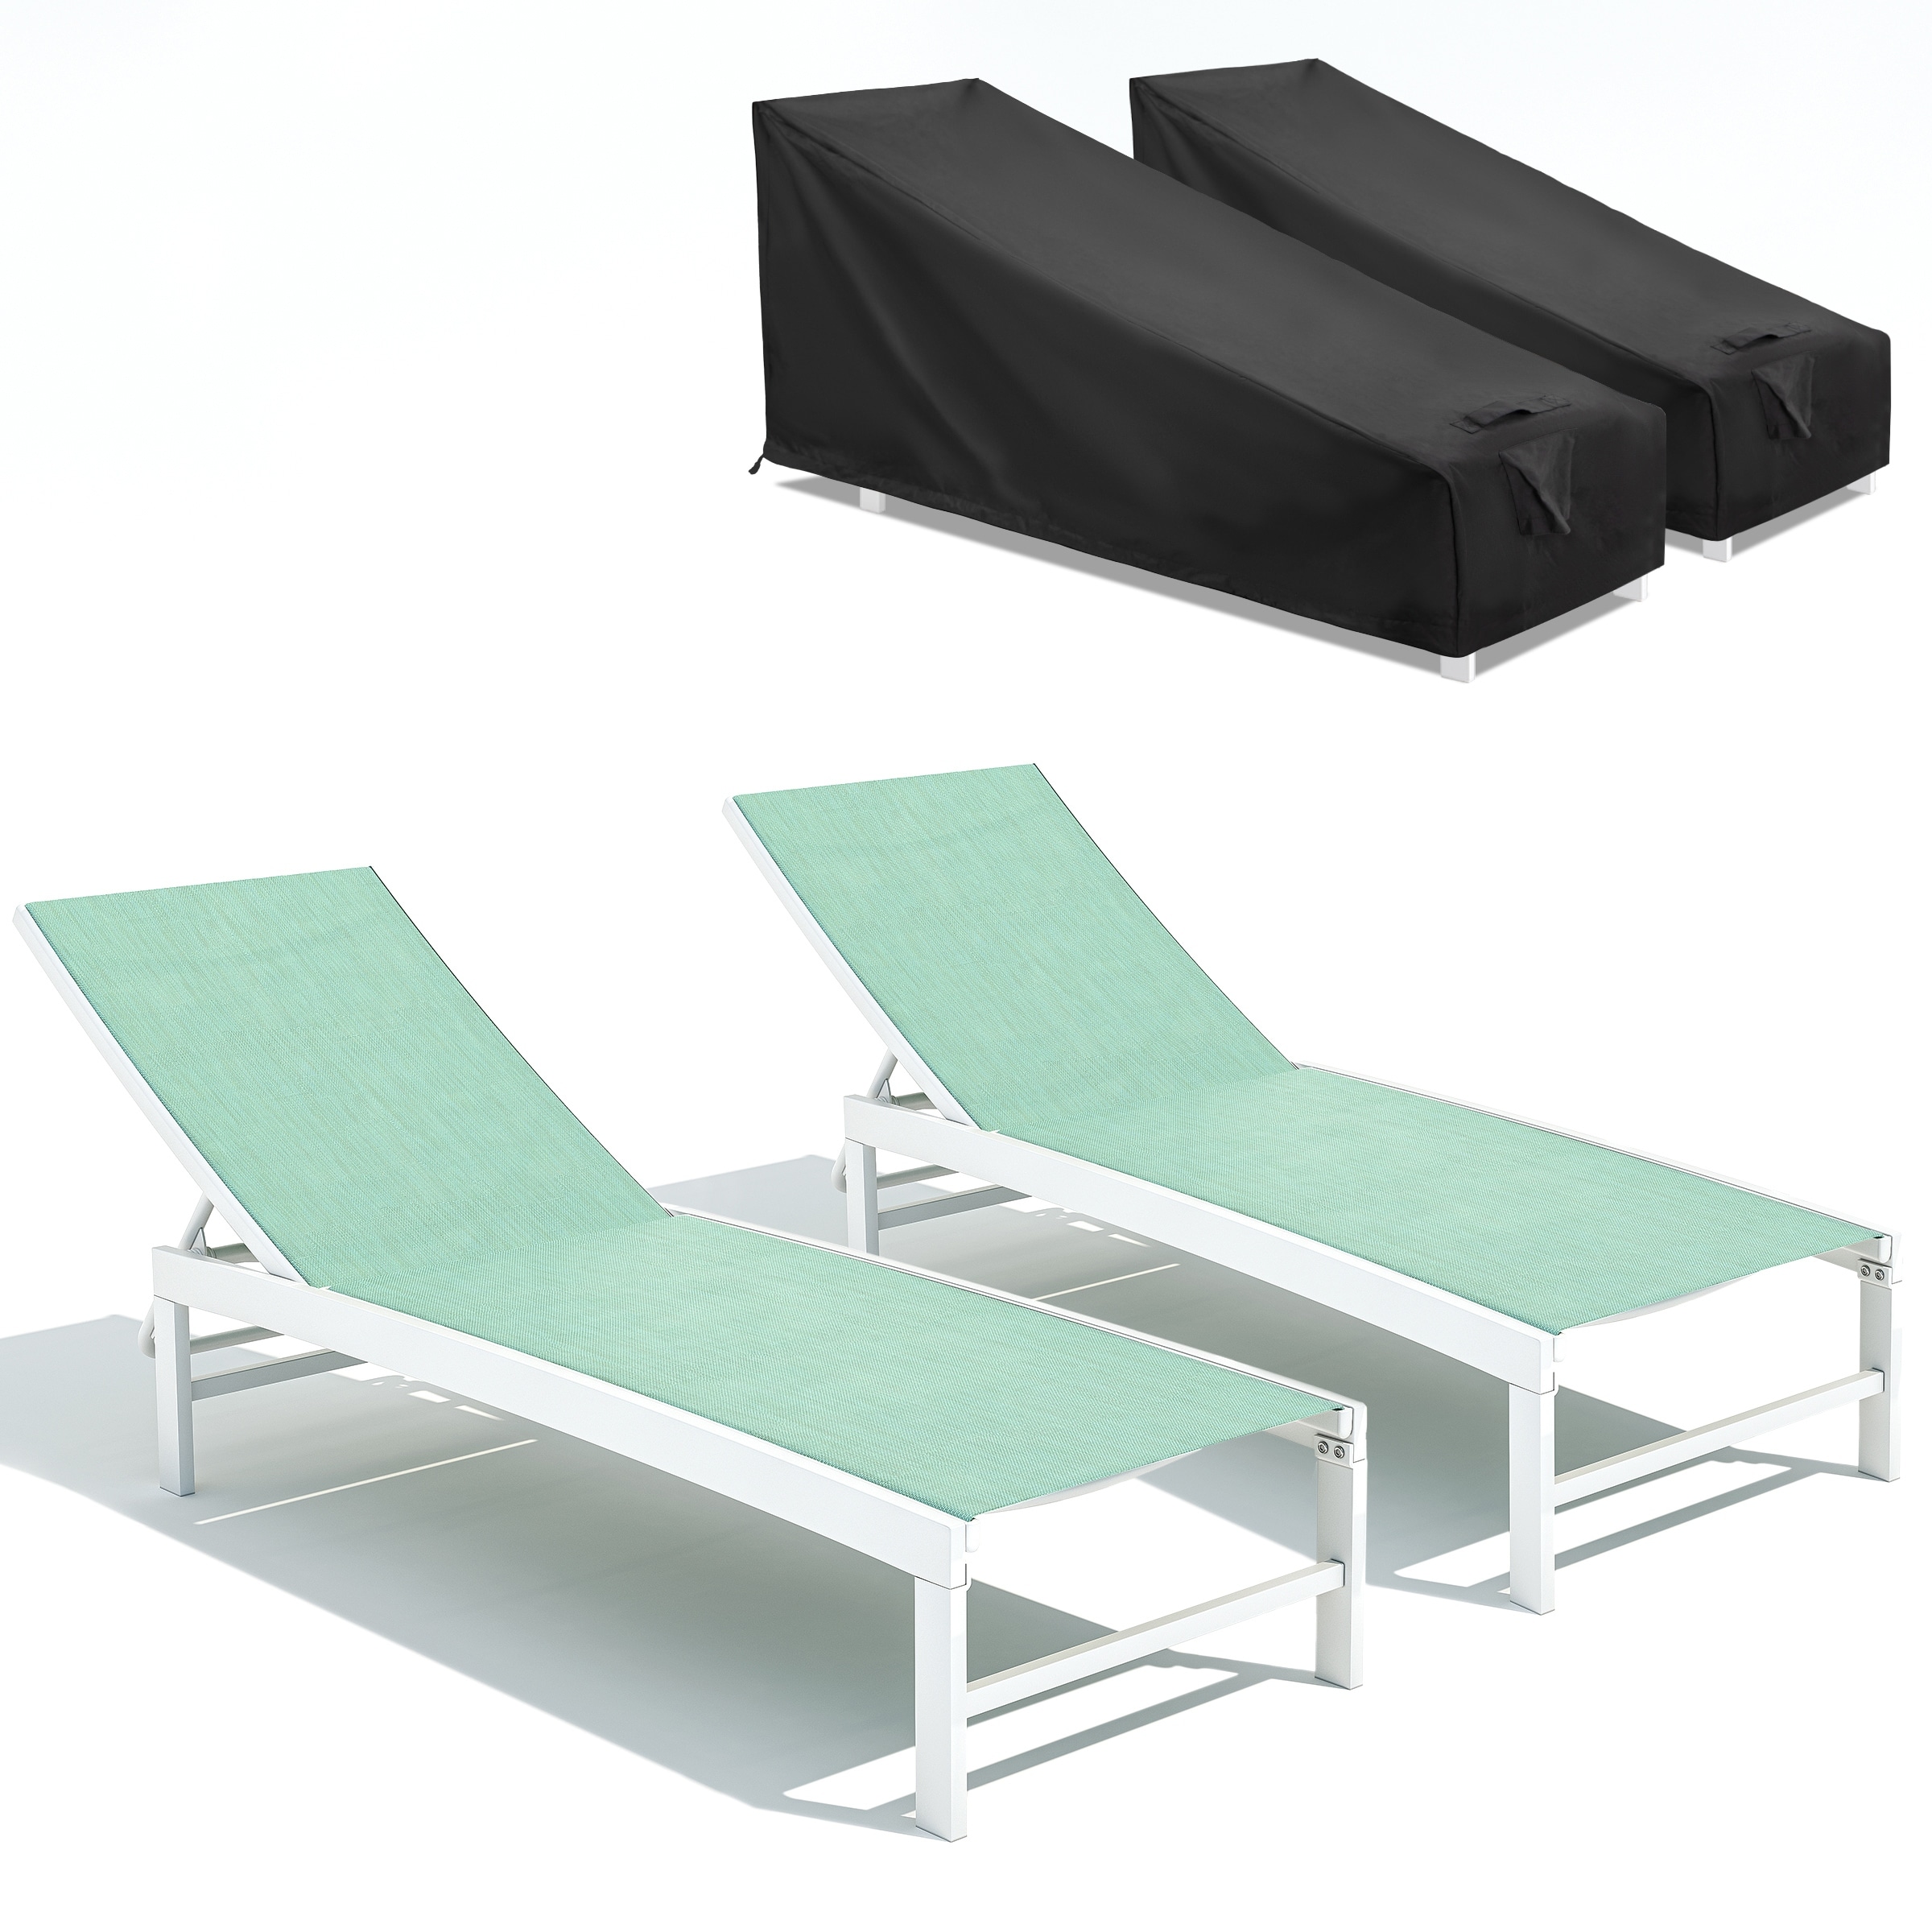 Crestlive Outdoor Loungers Patio Chaise Lounge Chairs Set Of 2 With Waterproof Covers - 71.65 L X 21.85 W X 13.78 H